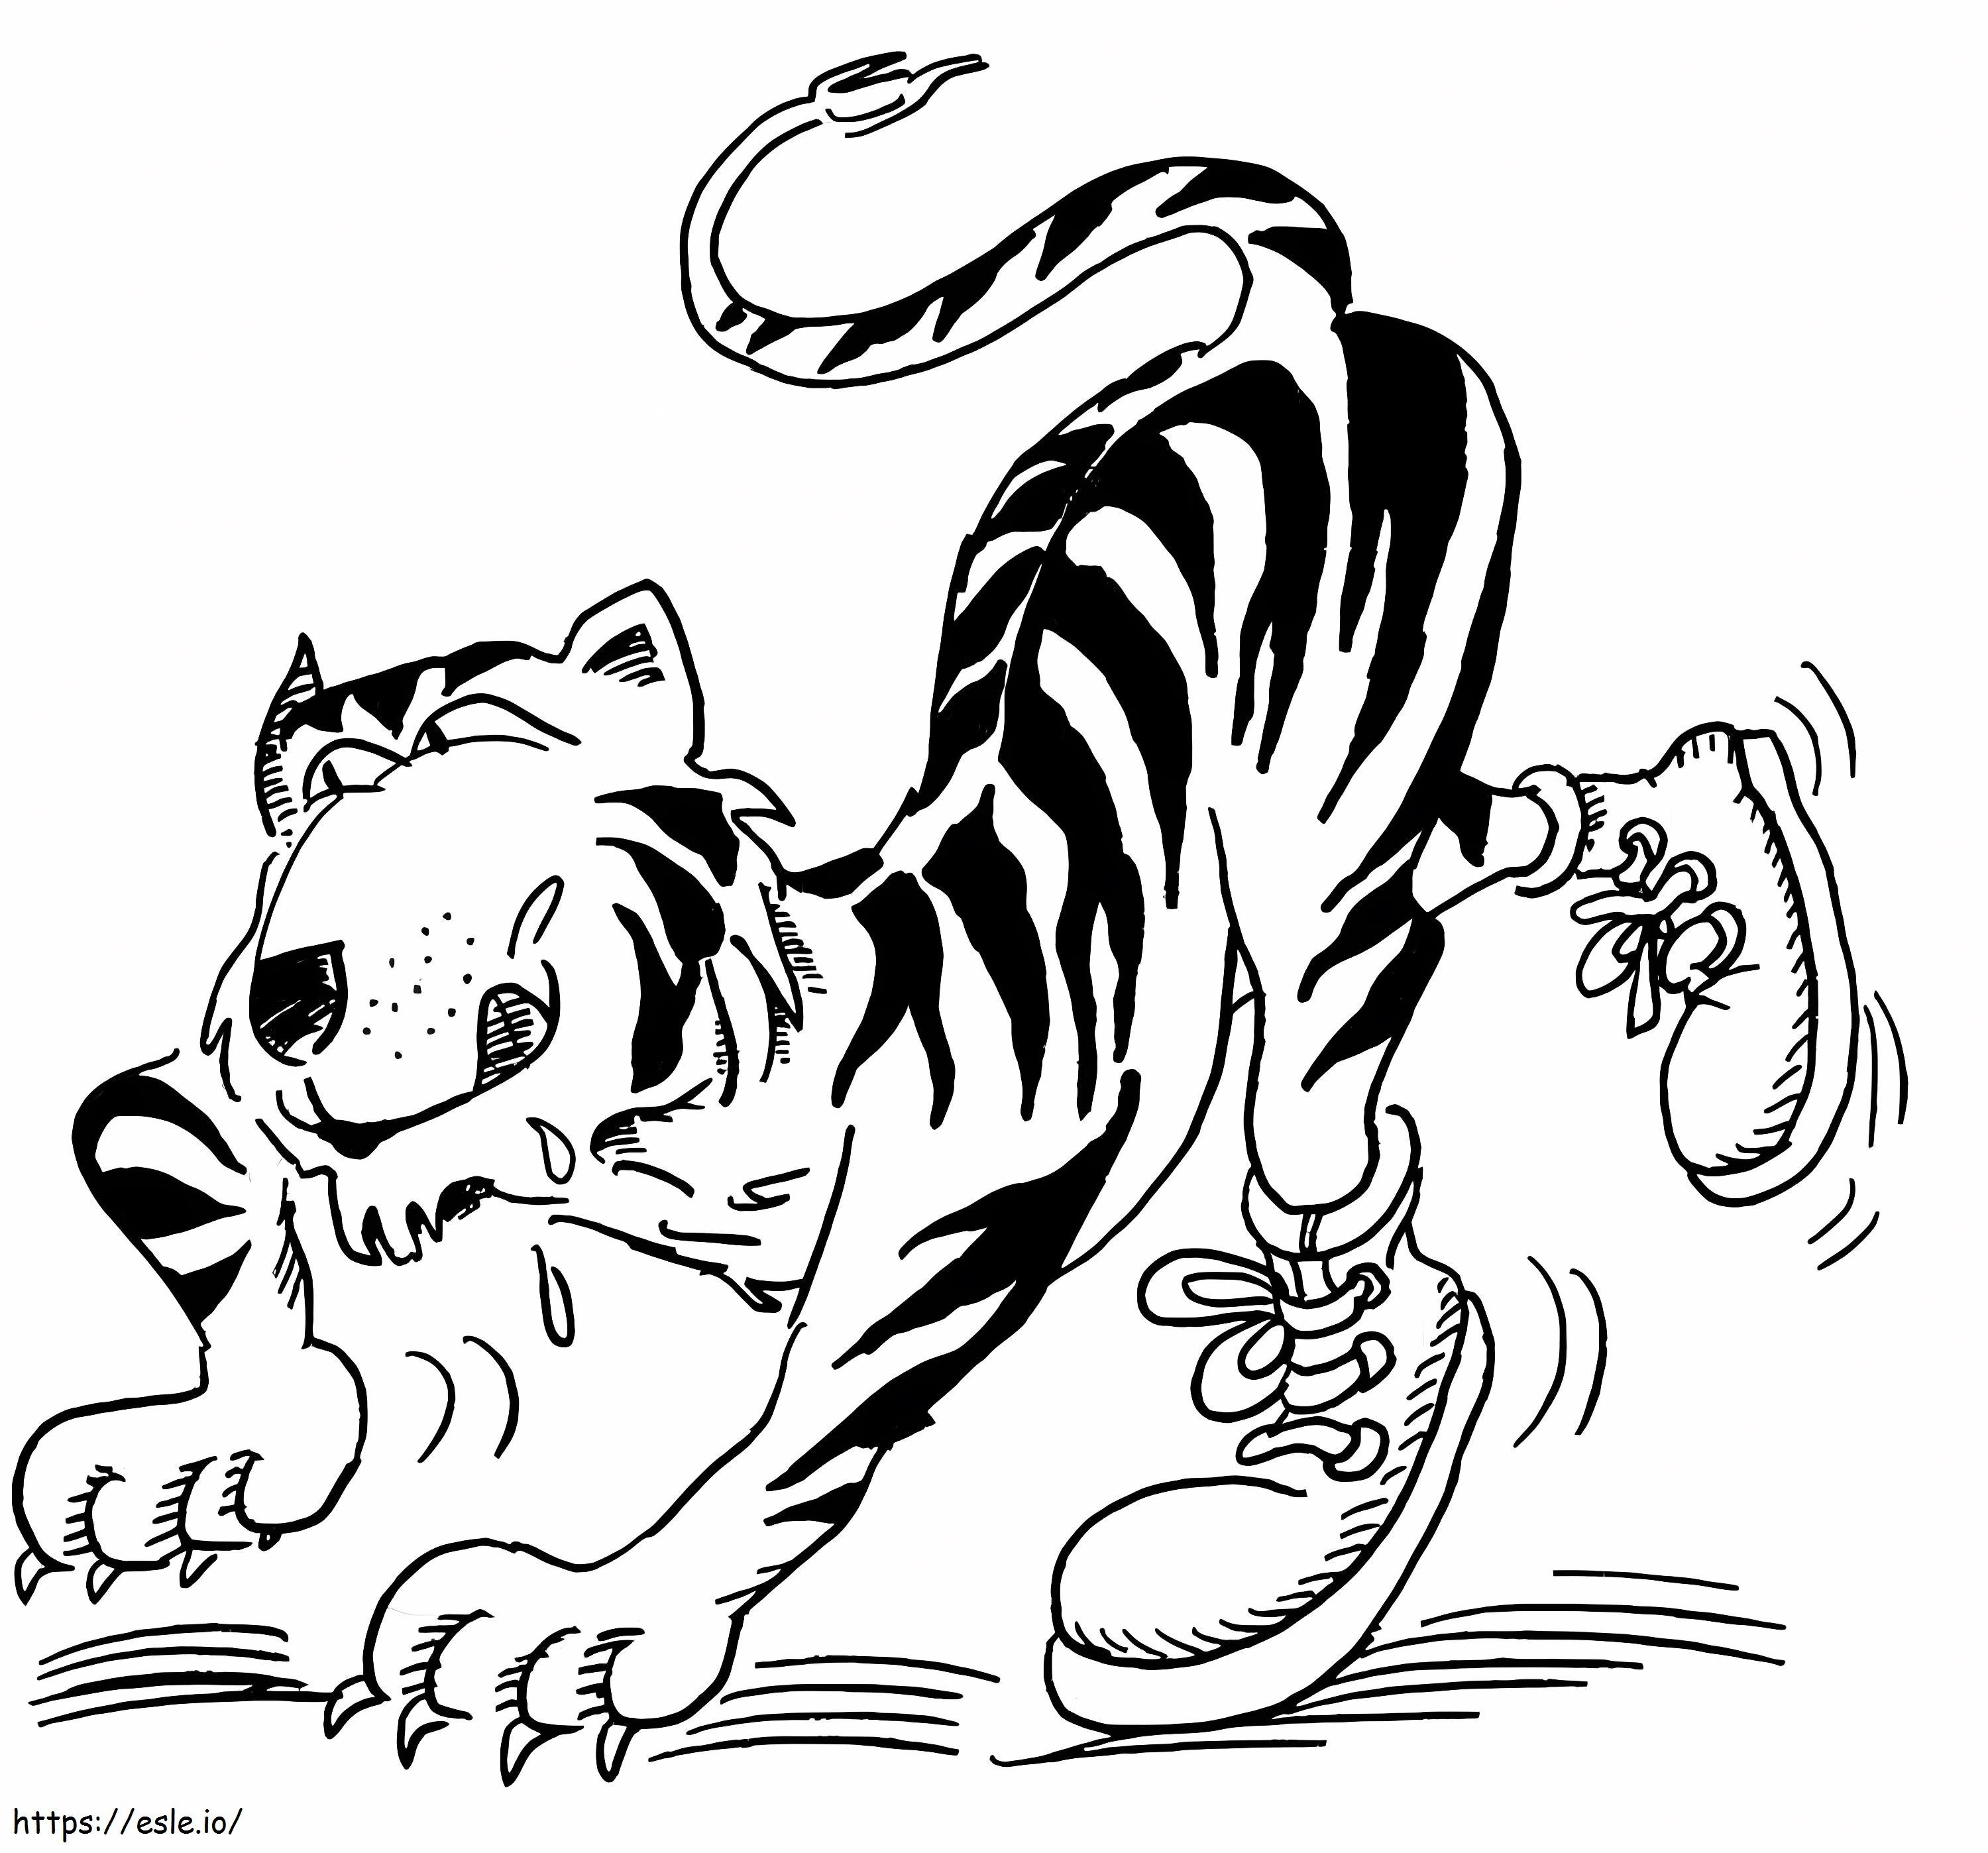 Hungry Tiger coloring page